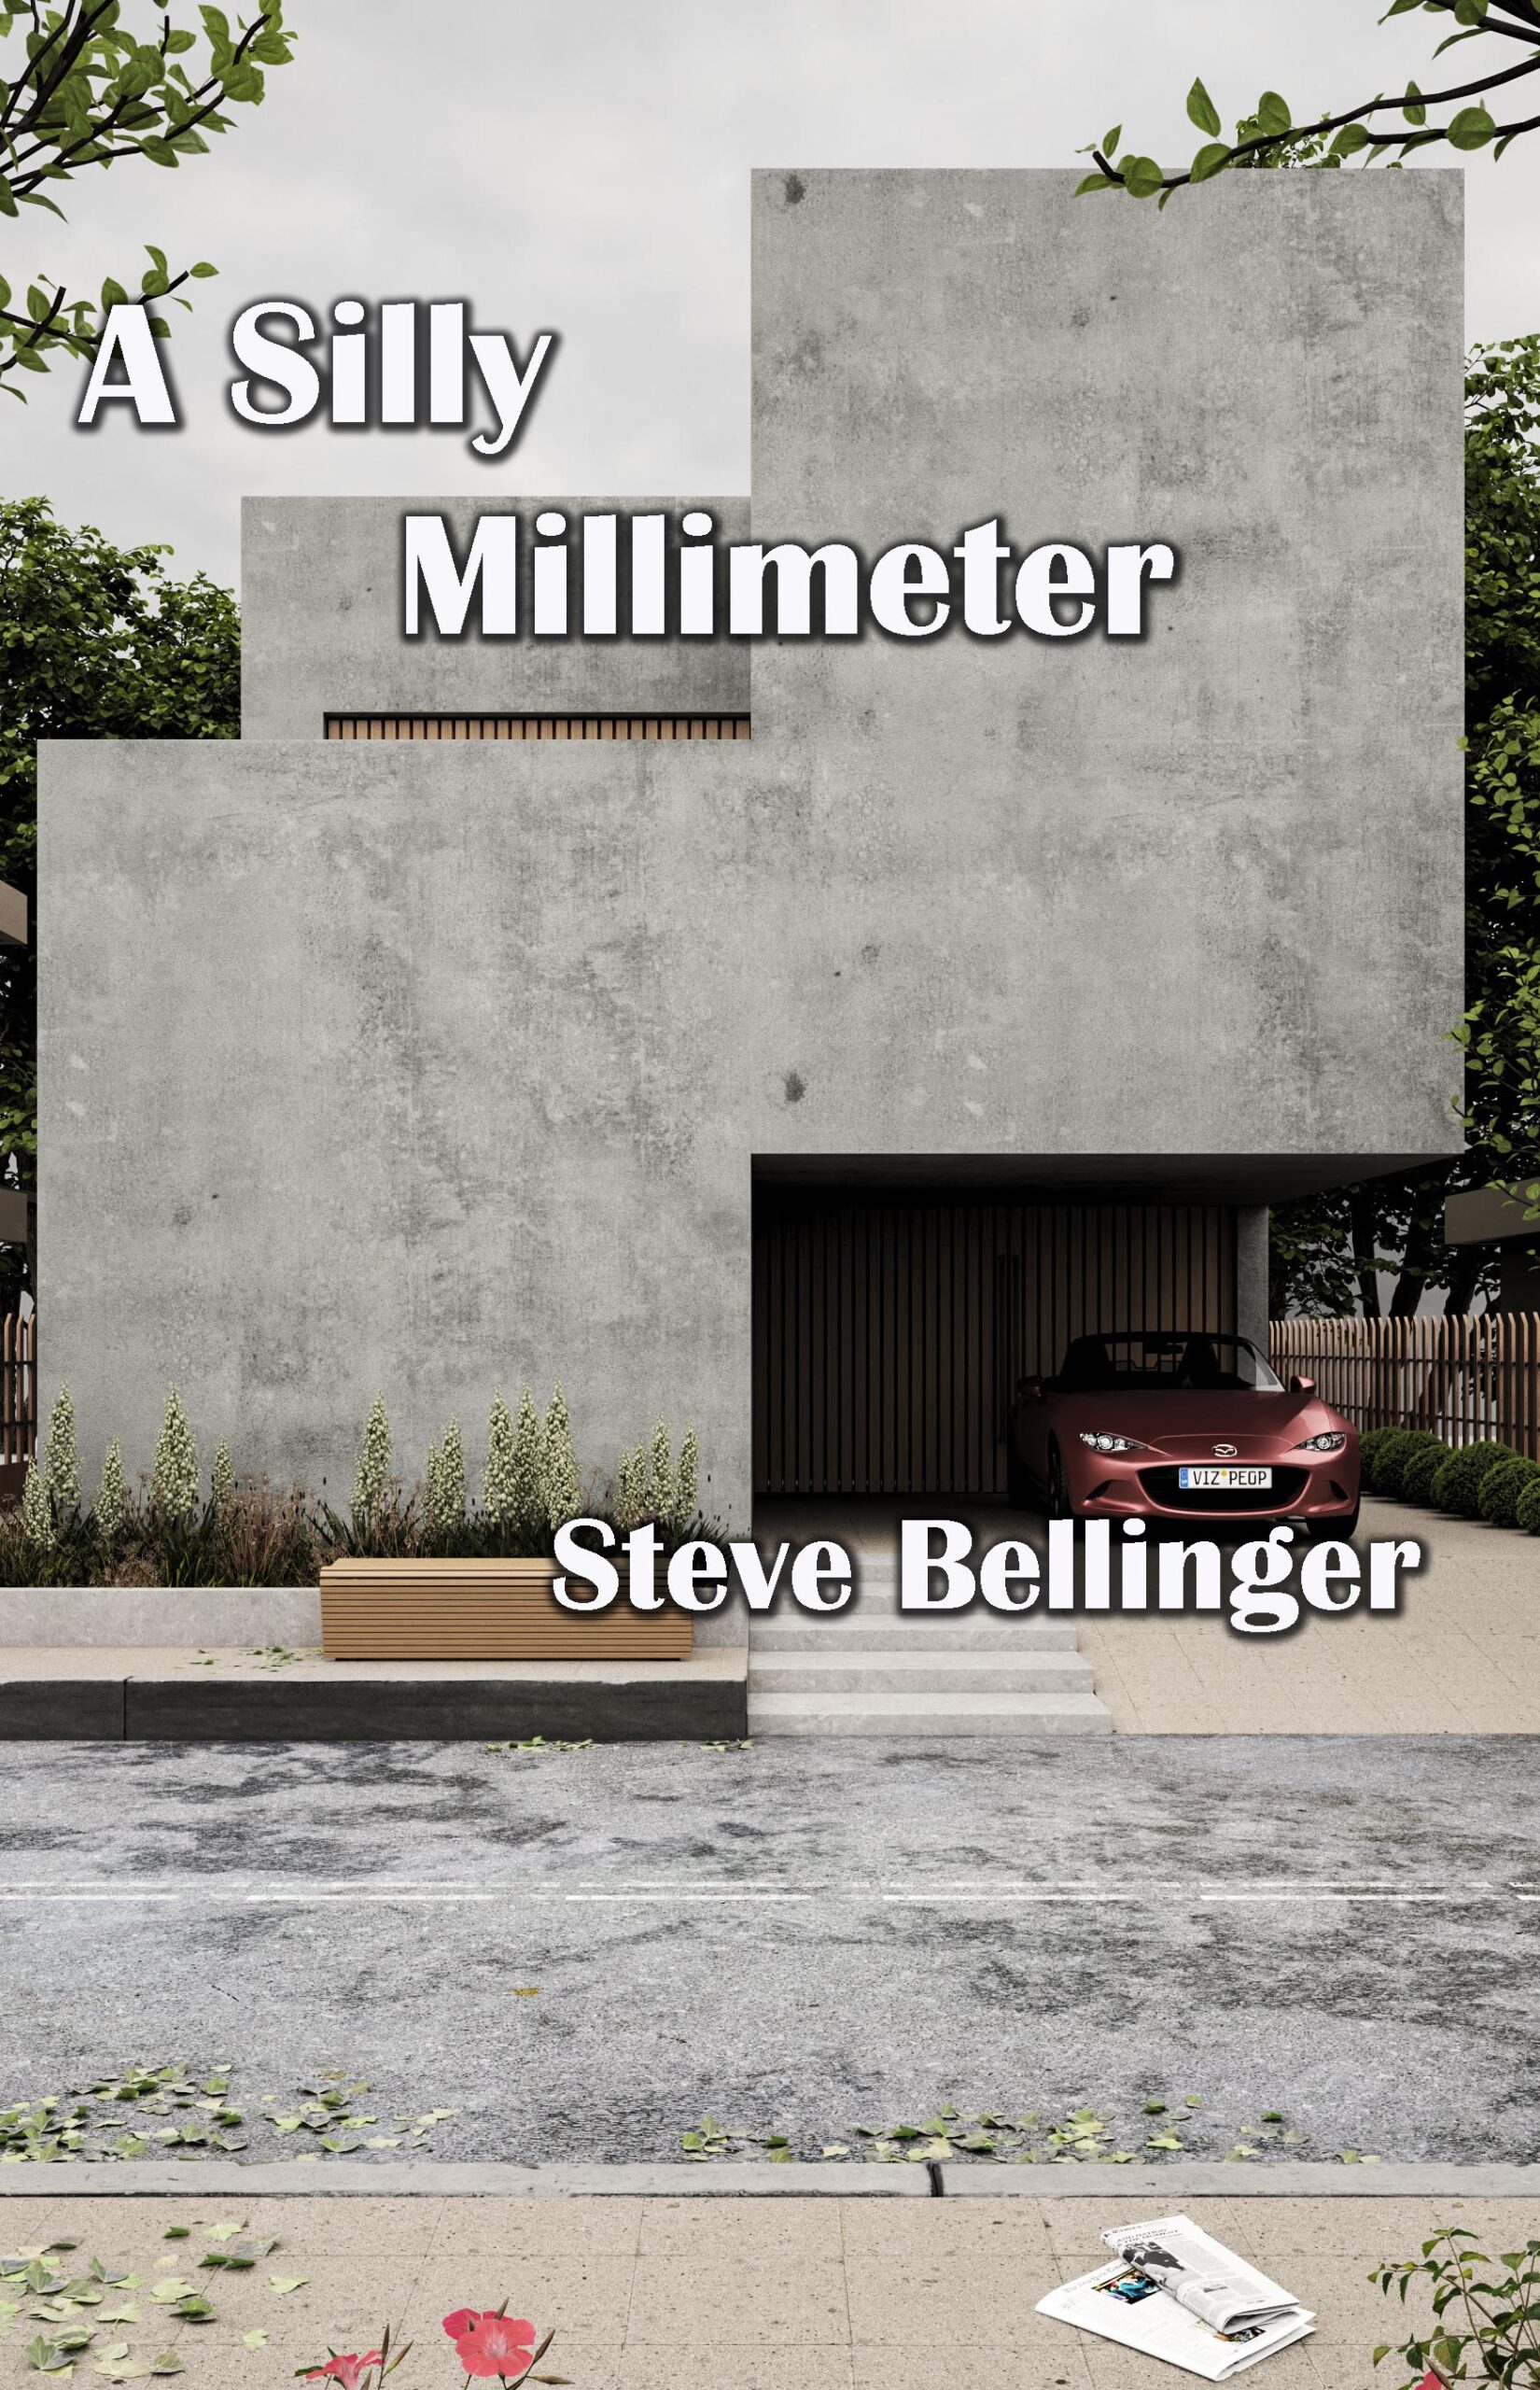 A Silly Millimeter